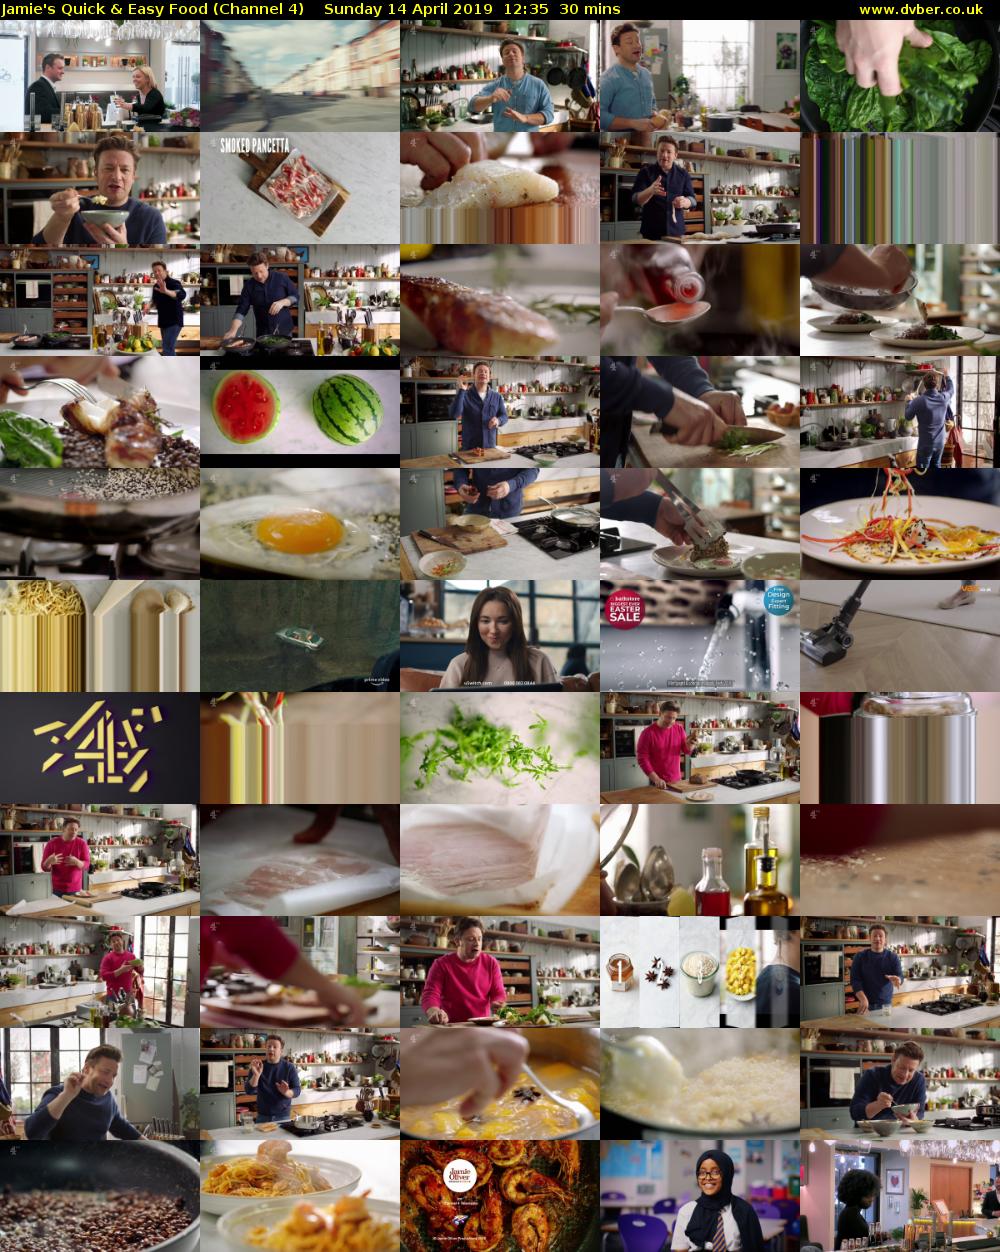 Jamie's Quick & Easy Food (Channel 4) Sunday 14 April 2019 12:35 - 13:05